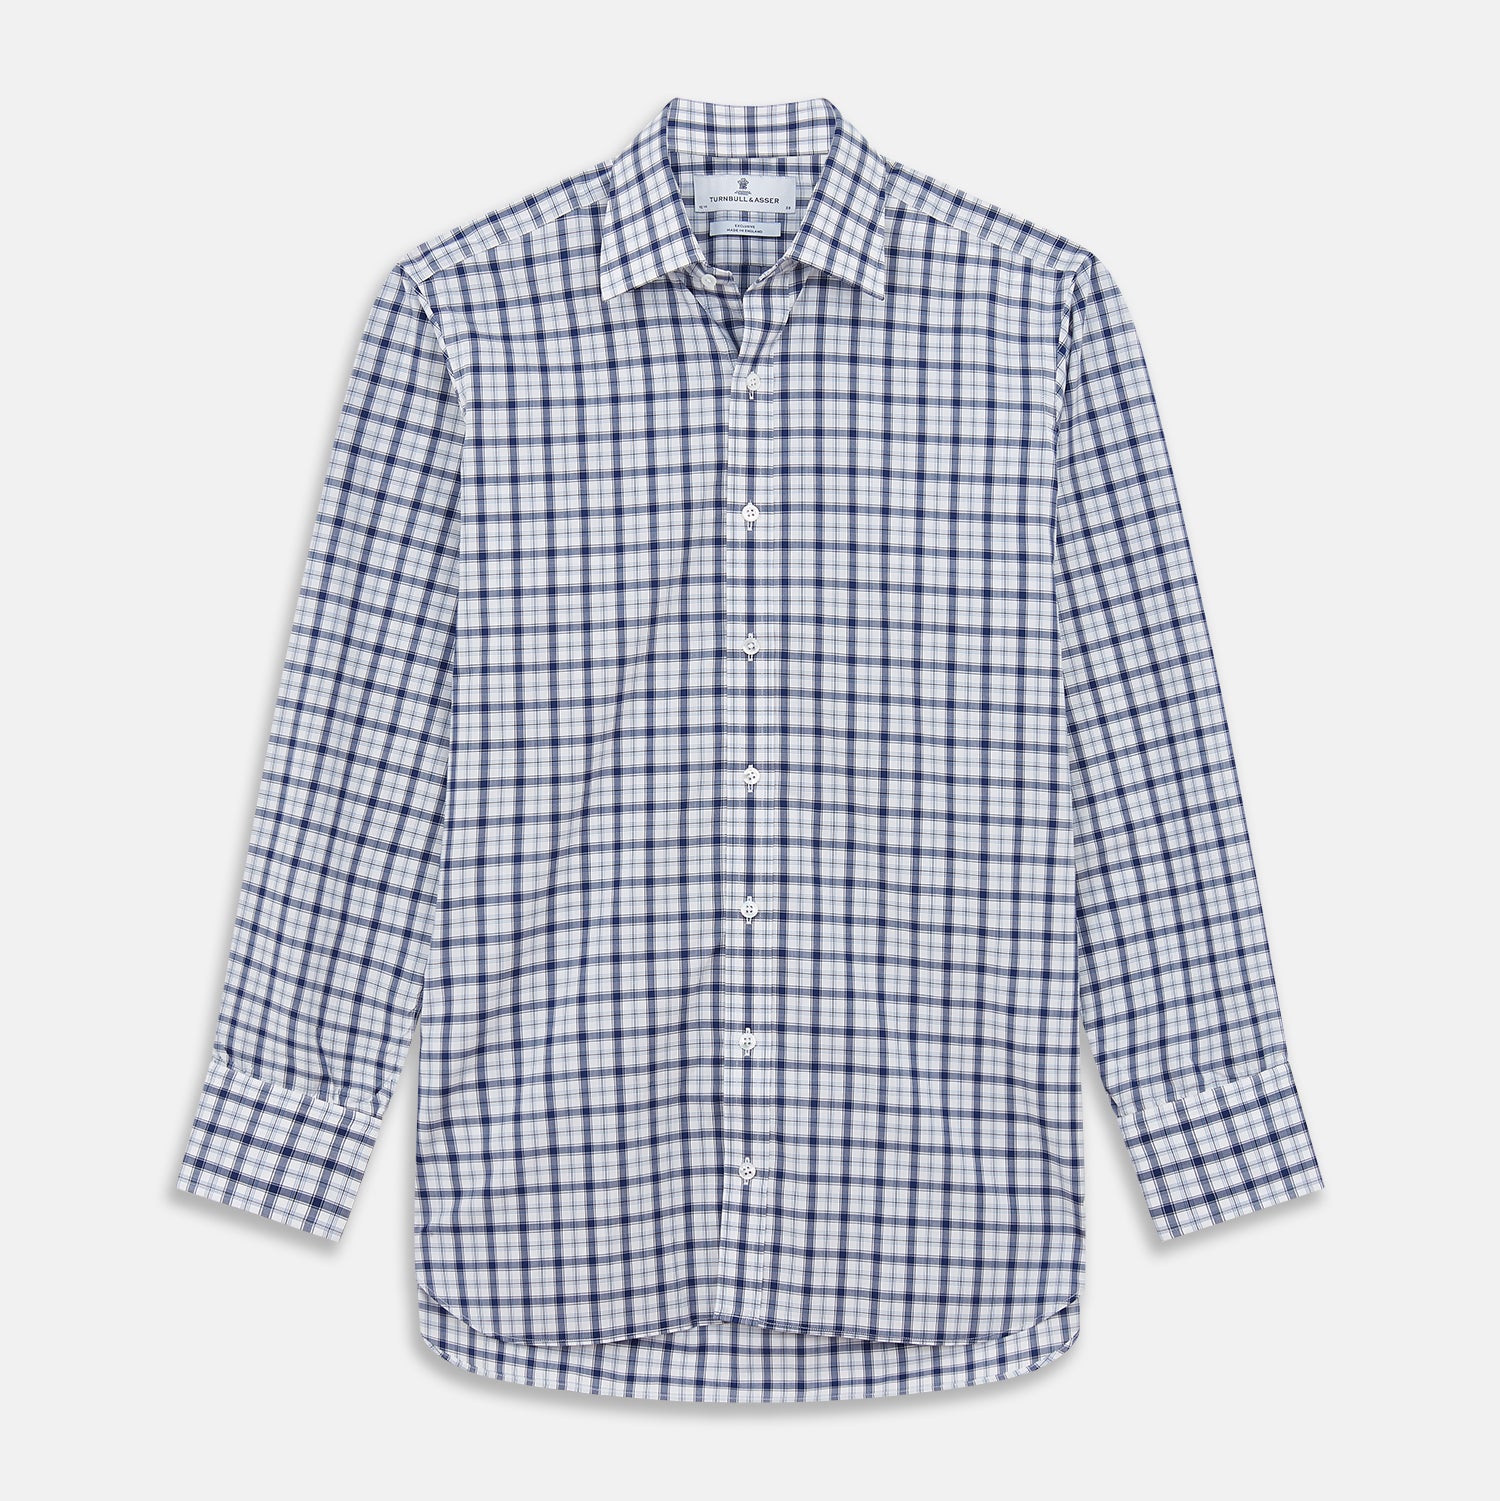 Navy Multi Check Regular Fit Shirt with T&A Collar and 3 Button Cuffs